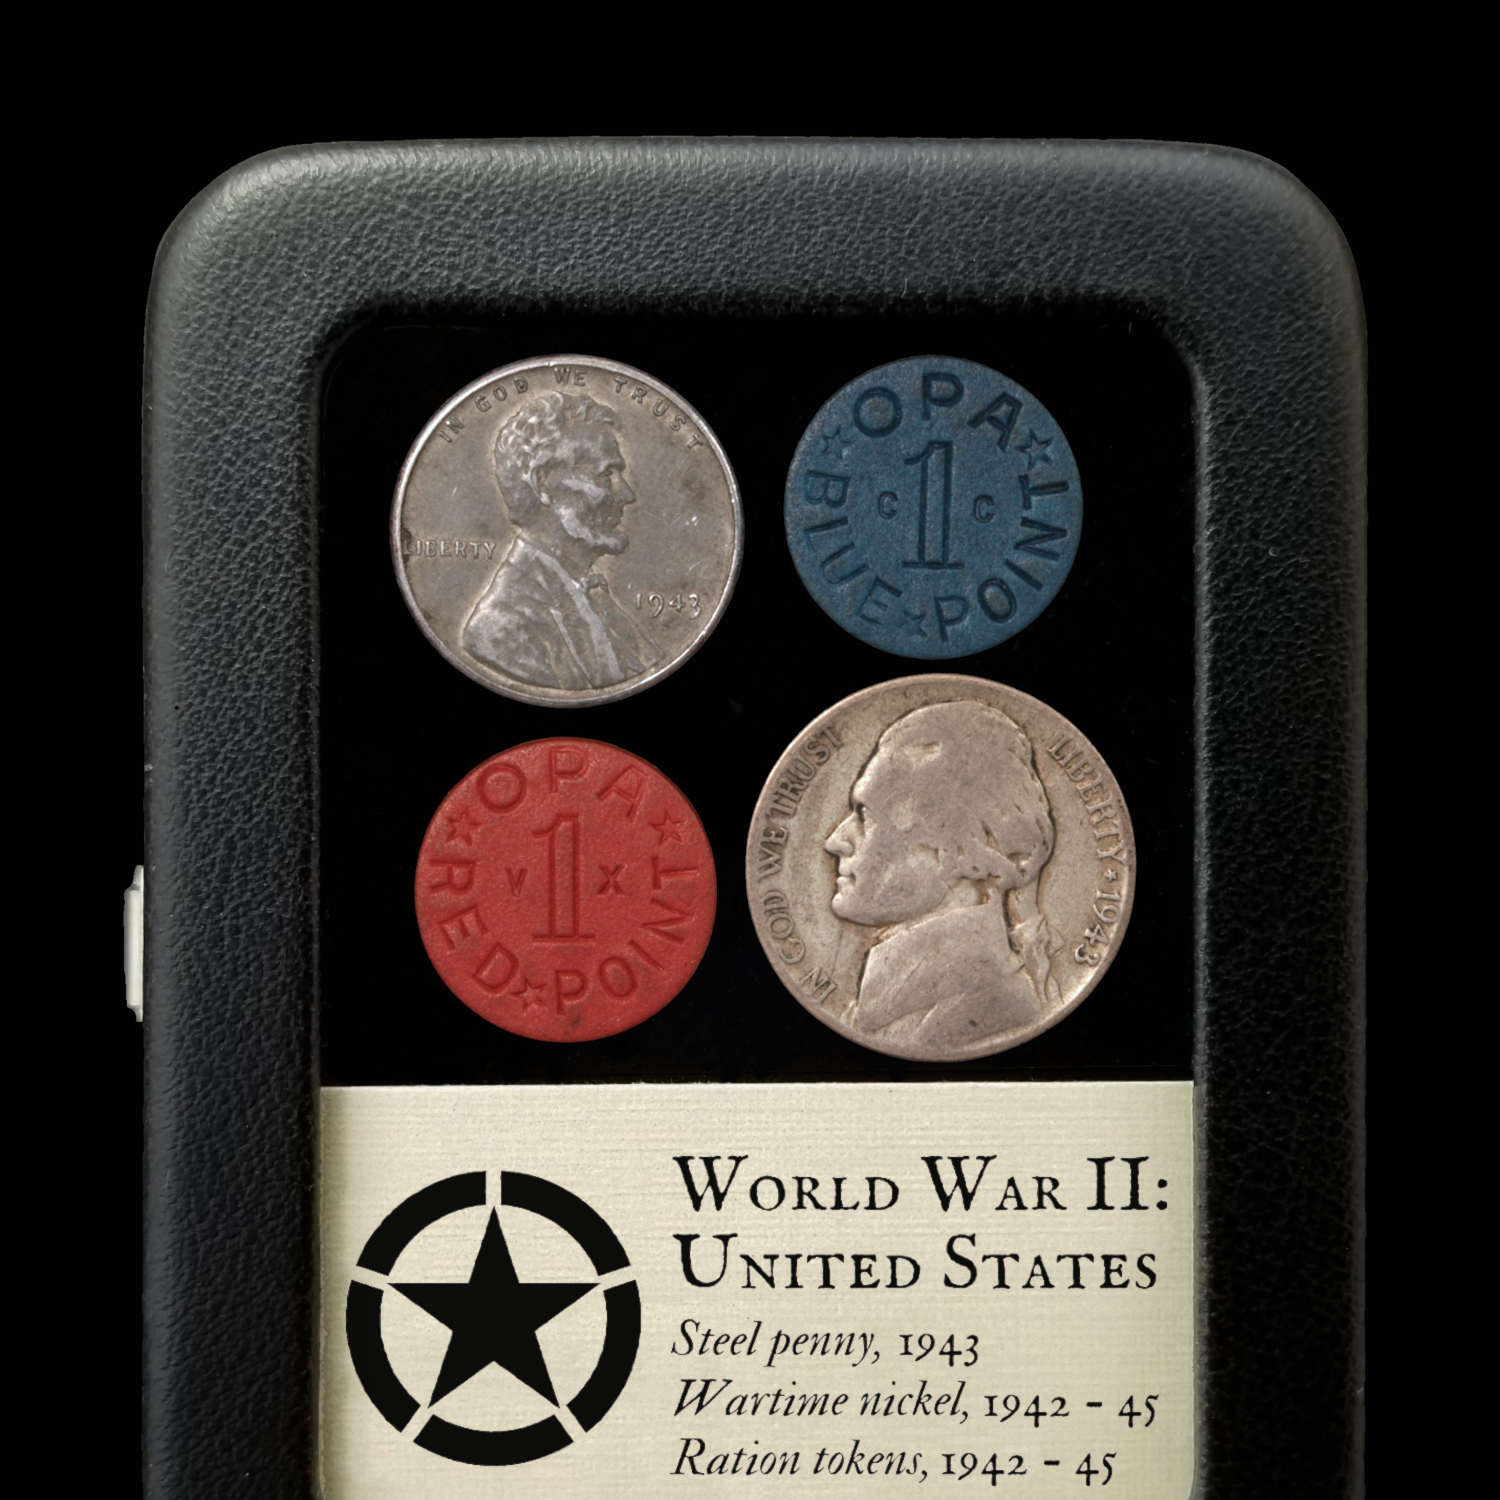 United States World War II Collection - 1942 to 1945 - United States